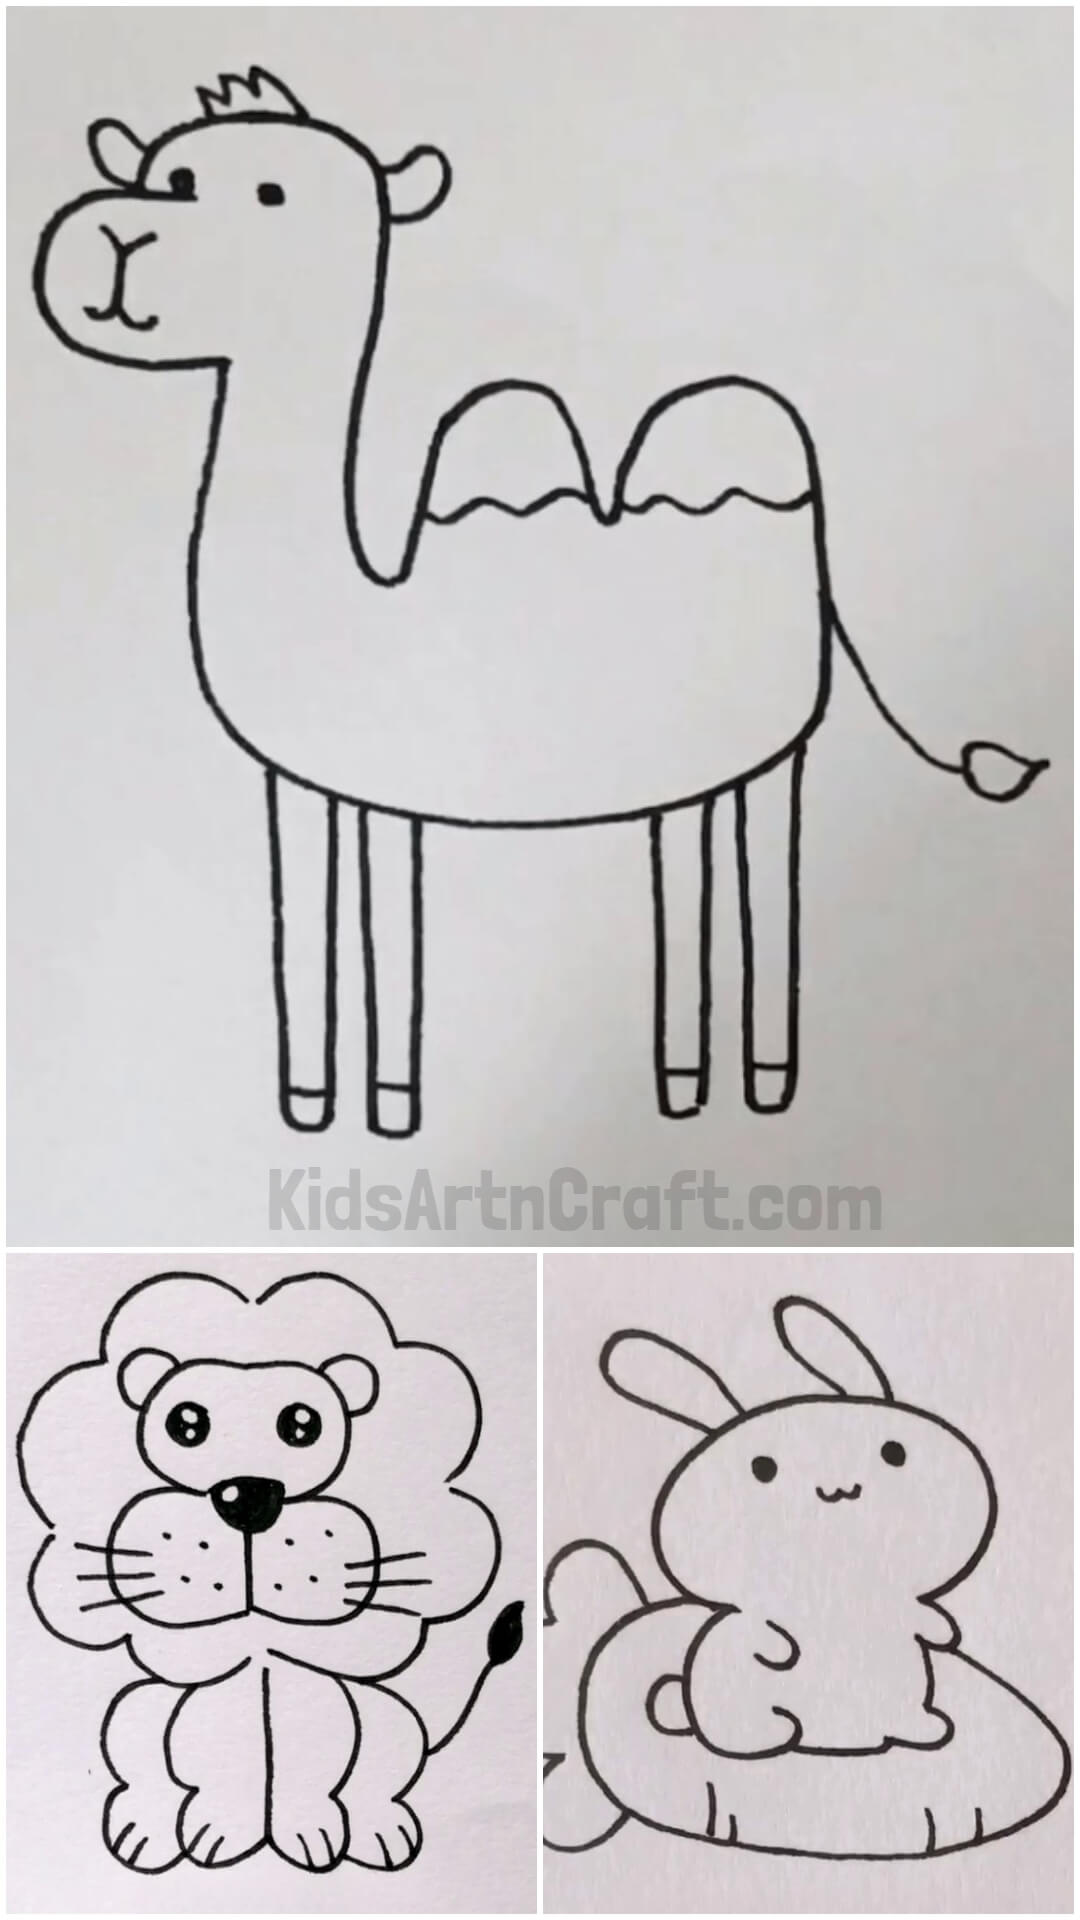 Easy Animal Drawings For Children of Age 4-8 Years